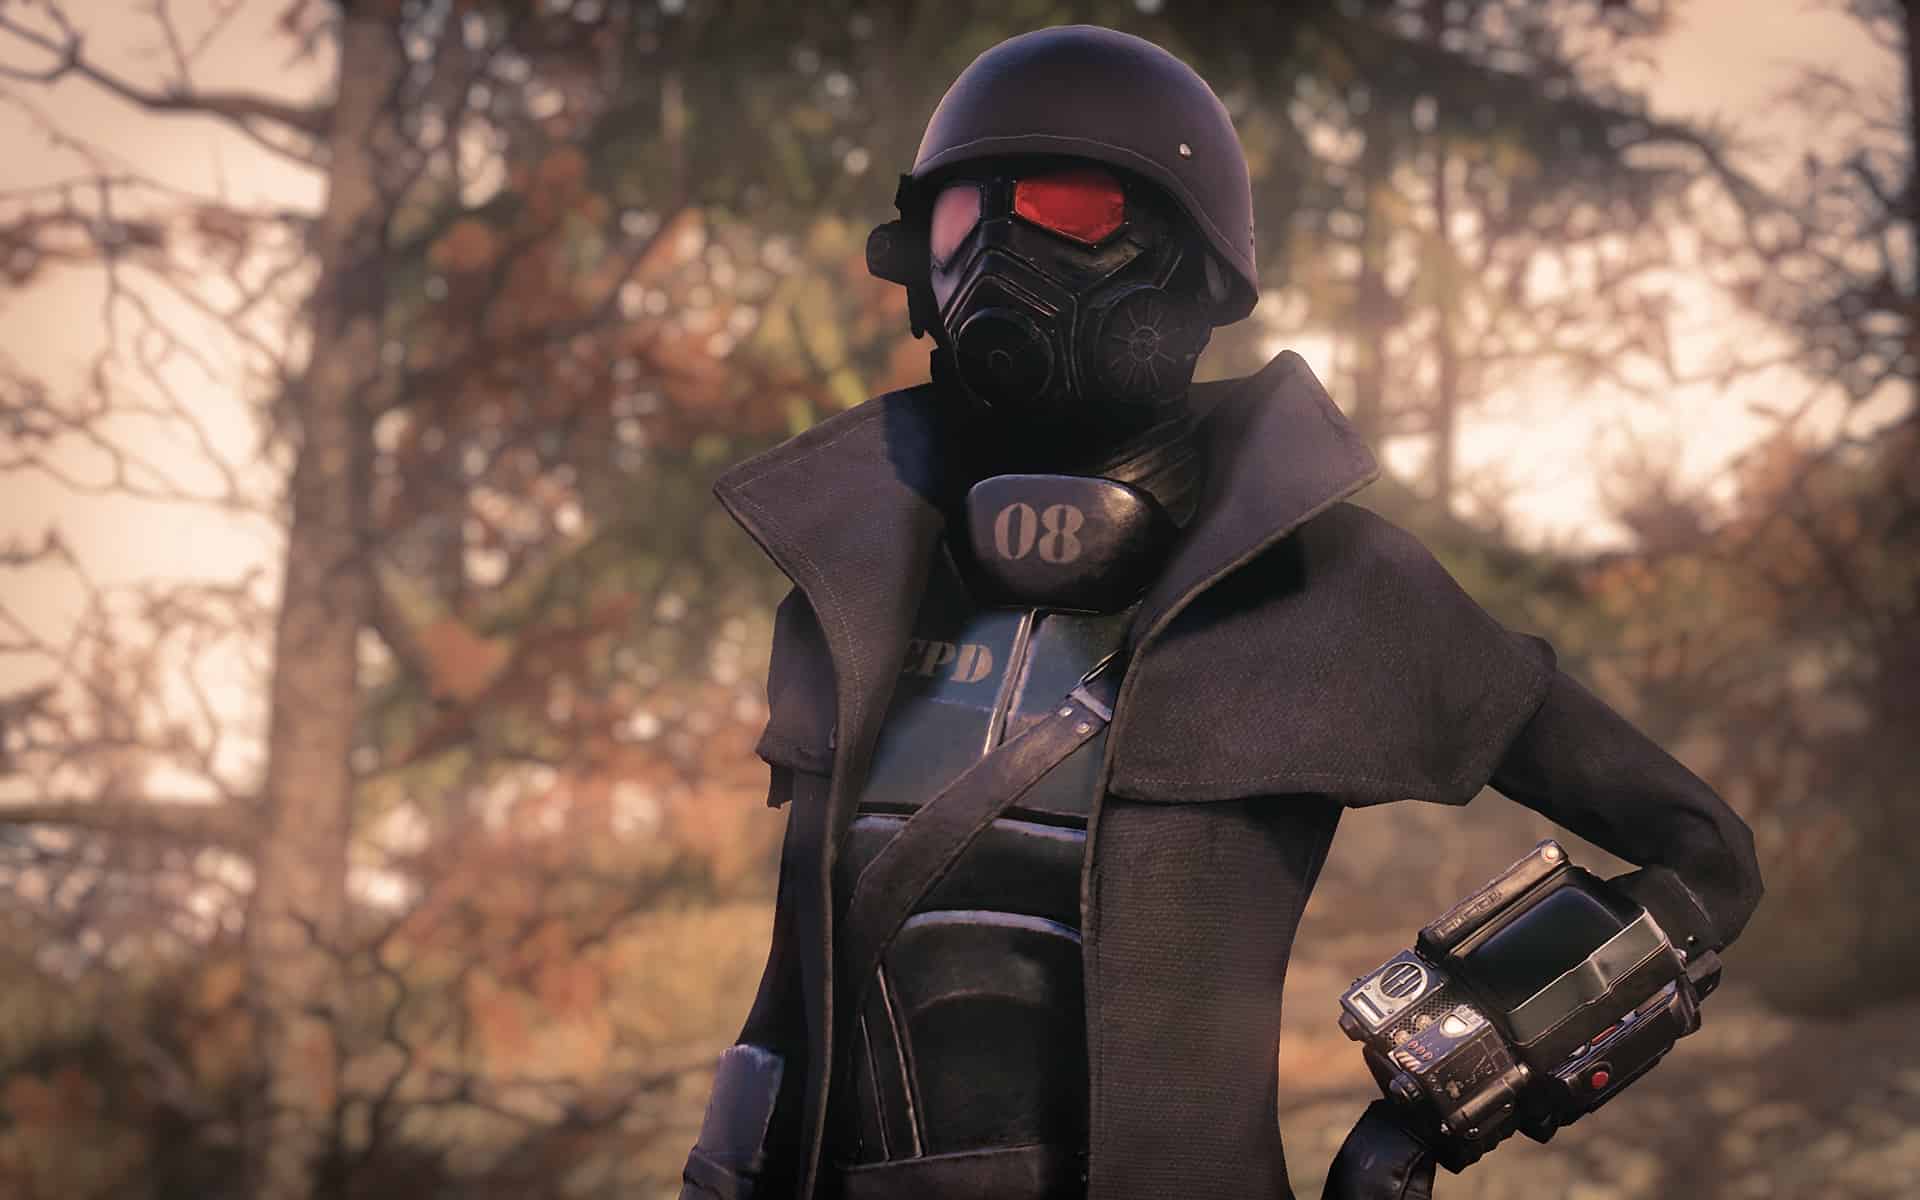 Clean Dark Ncr Ranger Outfit 4k Fallout 76 Mod Download